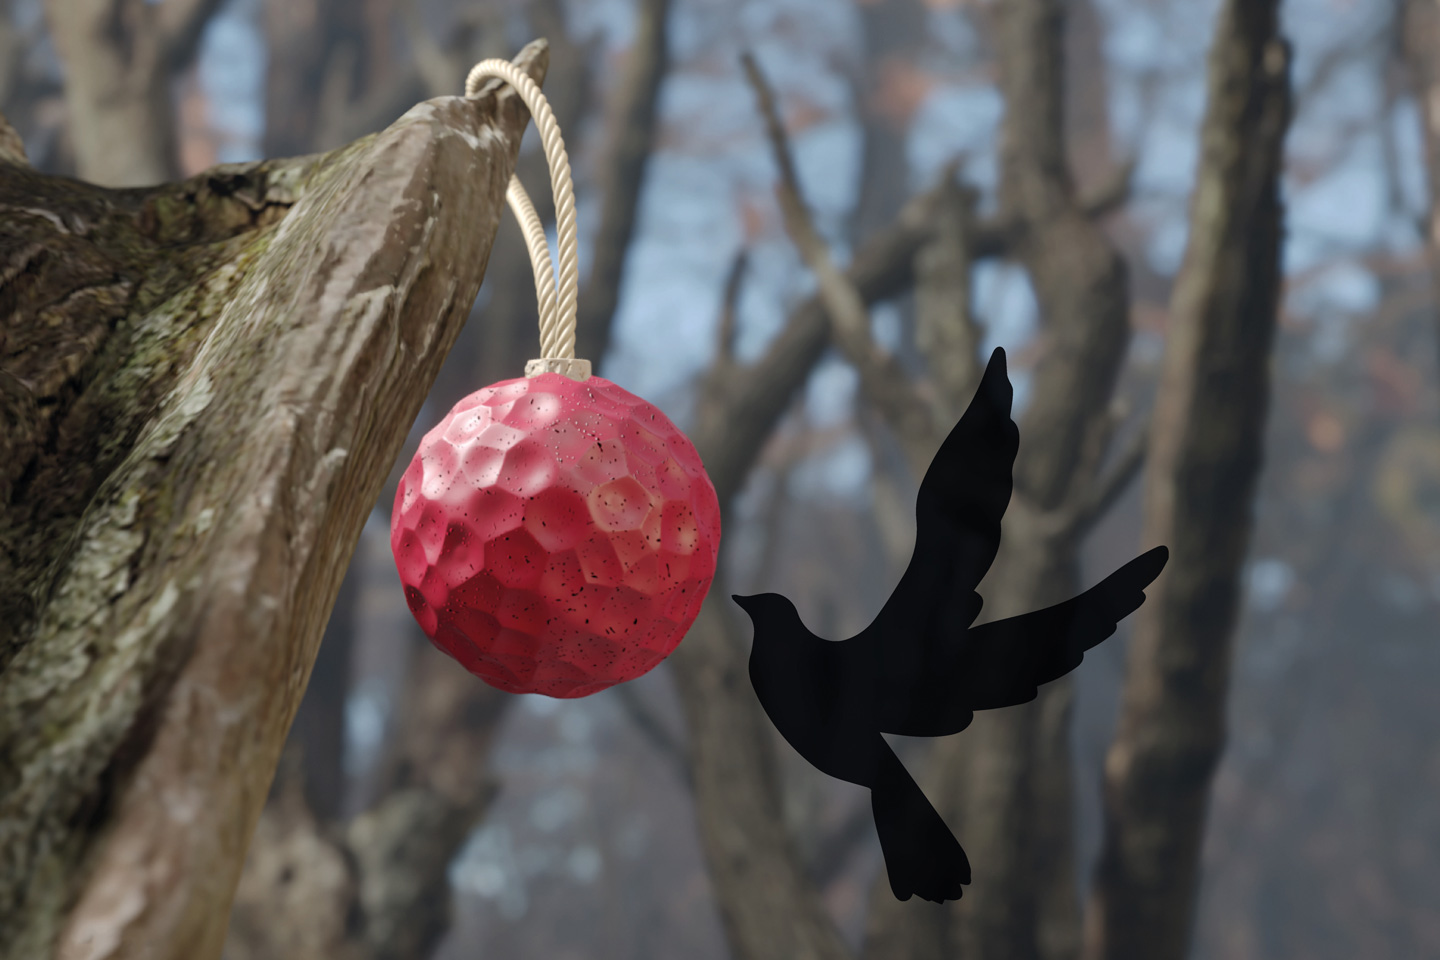 #Disperseed is a 3D-printed seed ball that helps forests repopulate after a forest fire